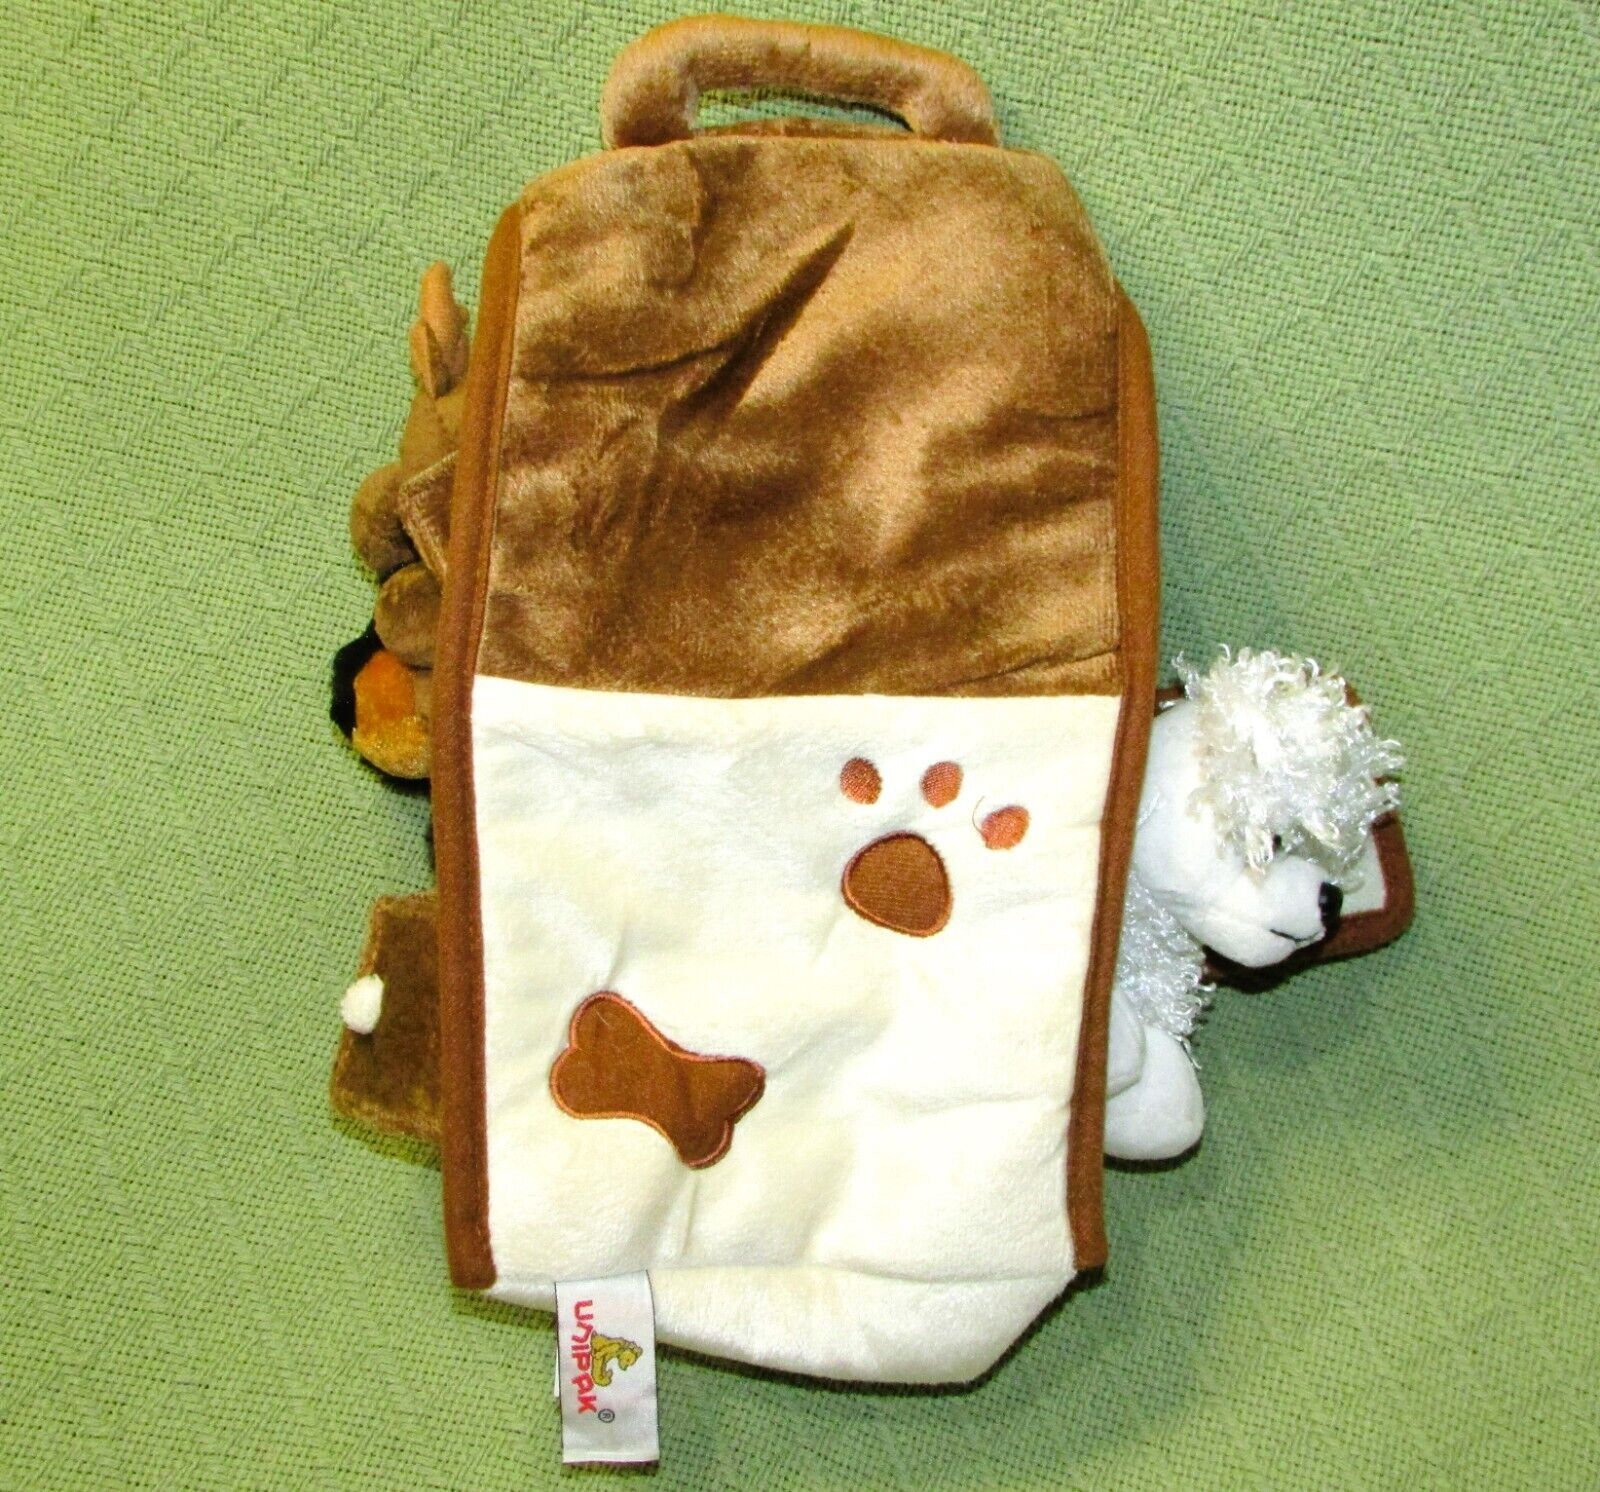 UNIPAK DOG HOUSE WITH 5 ASSORTED ANIMALS TOY PET CARRIER WITH HANDLE 12" TALL - $9.45